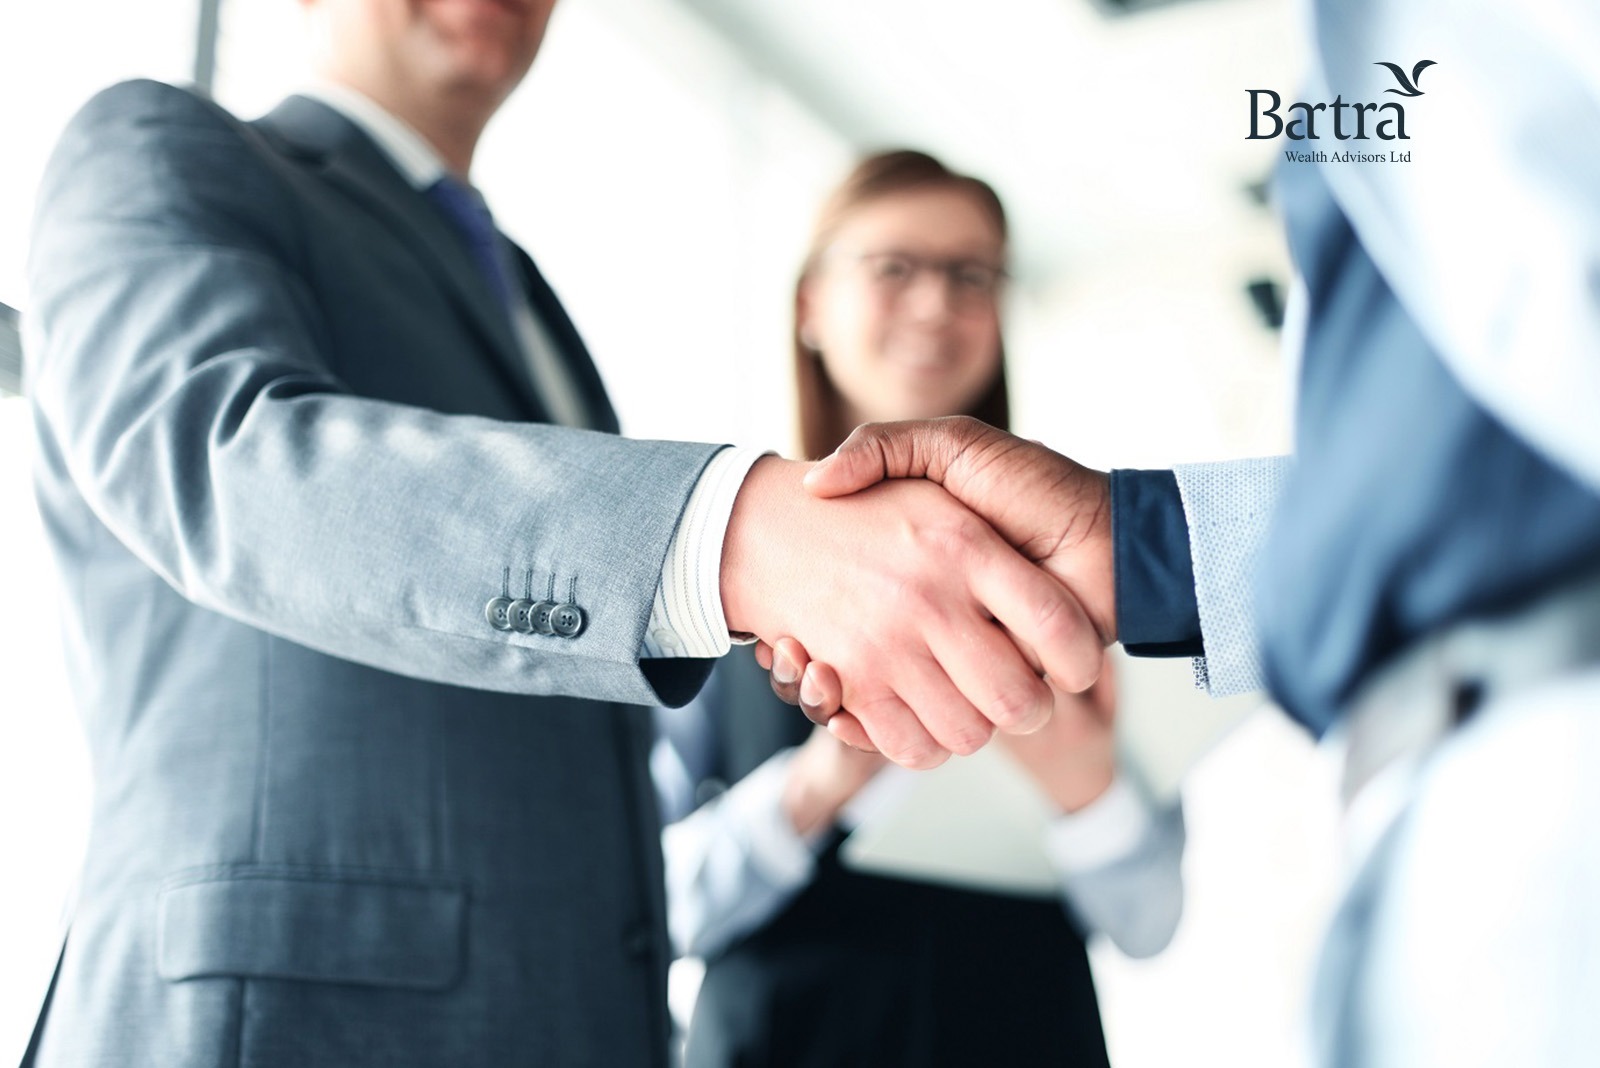 Irish Developer Bartra To Repay Over €90 Million To Immigration-By-Investment Clients – Projects Delivered on Time and on Budget and Sold to Institutional Investors